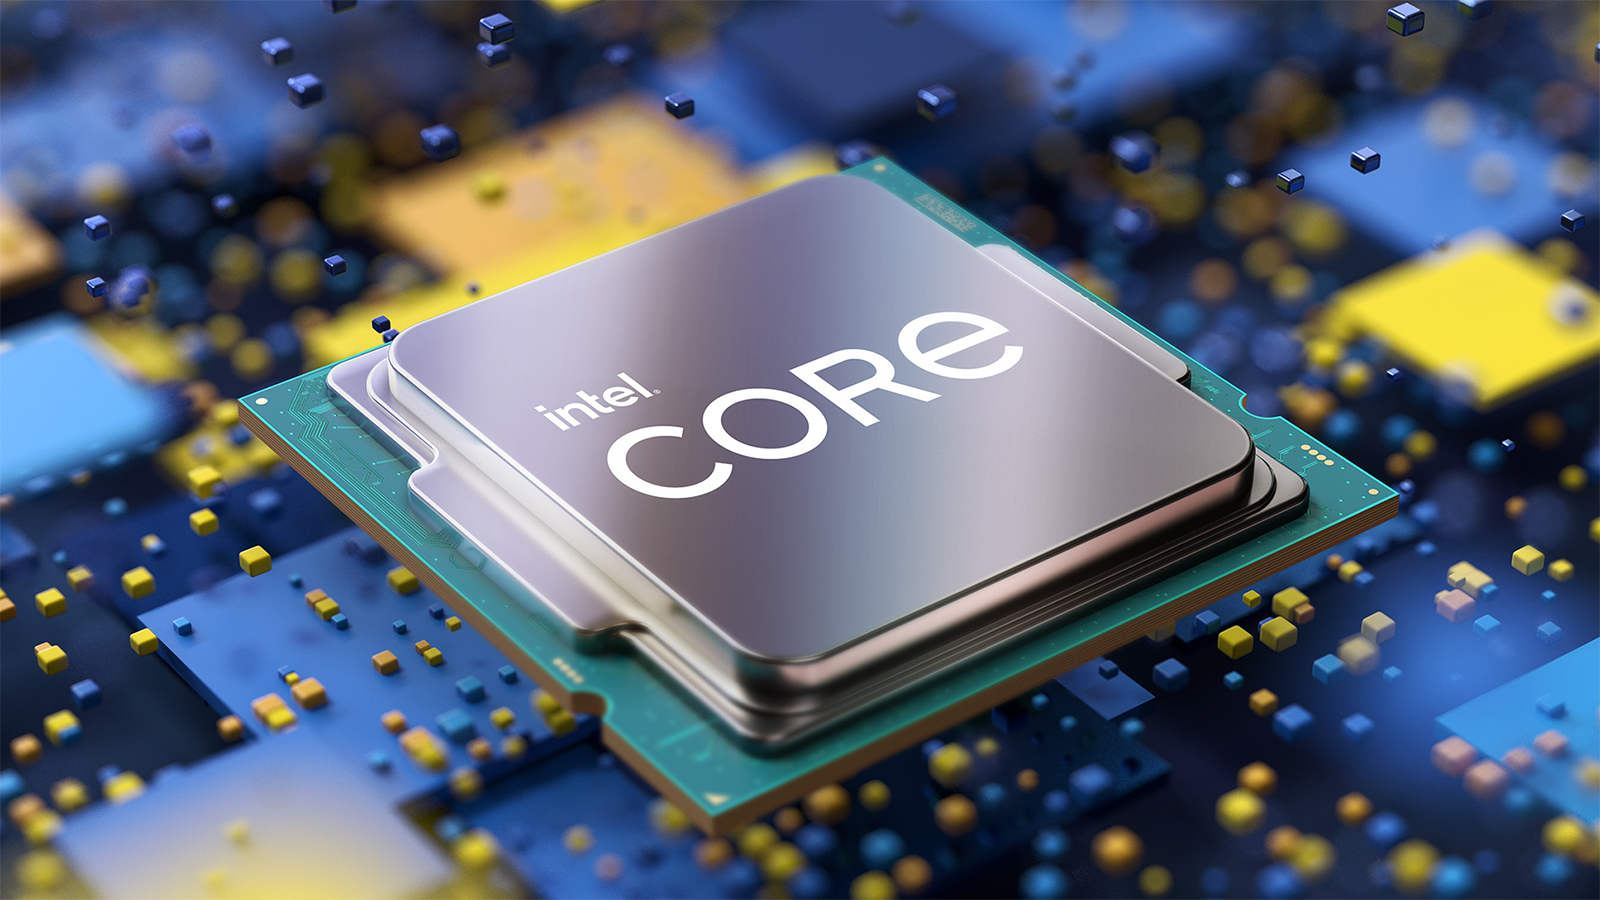 Intel 11th Gen processors takes the fight to AMD with 5.0GHz speeds